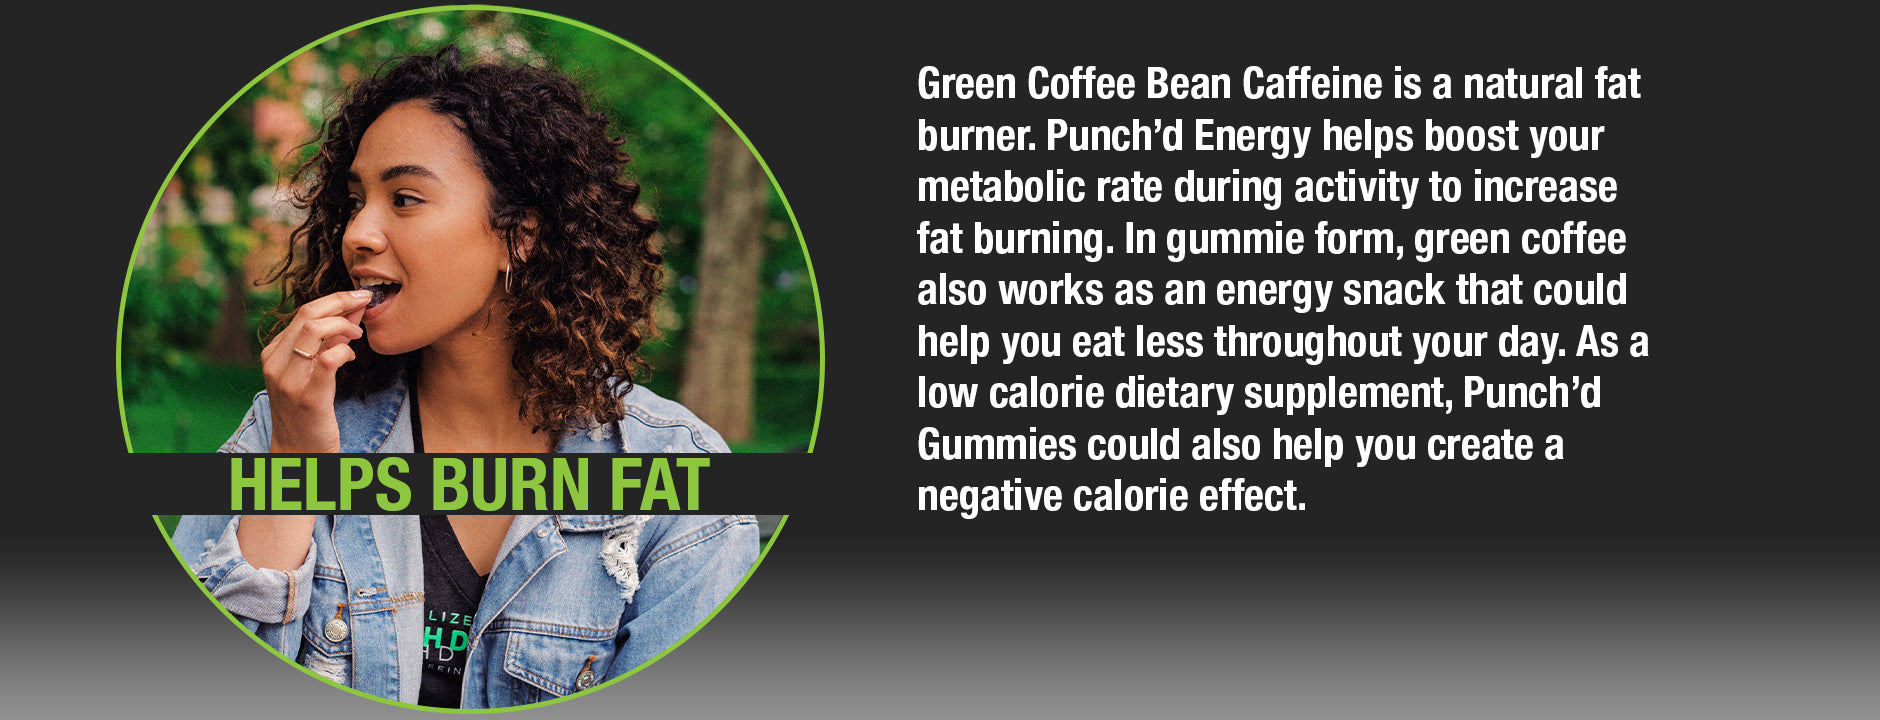 Punch'd Energy Helps Burn Fat